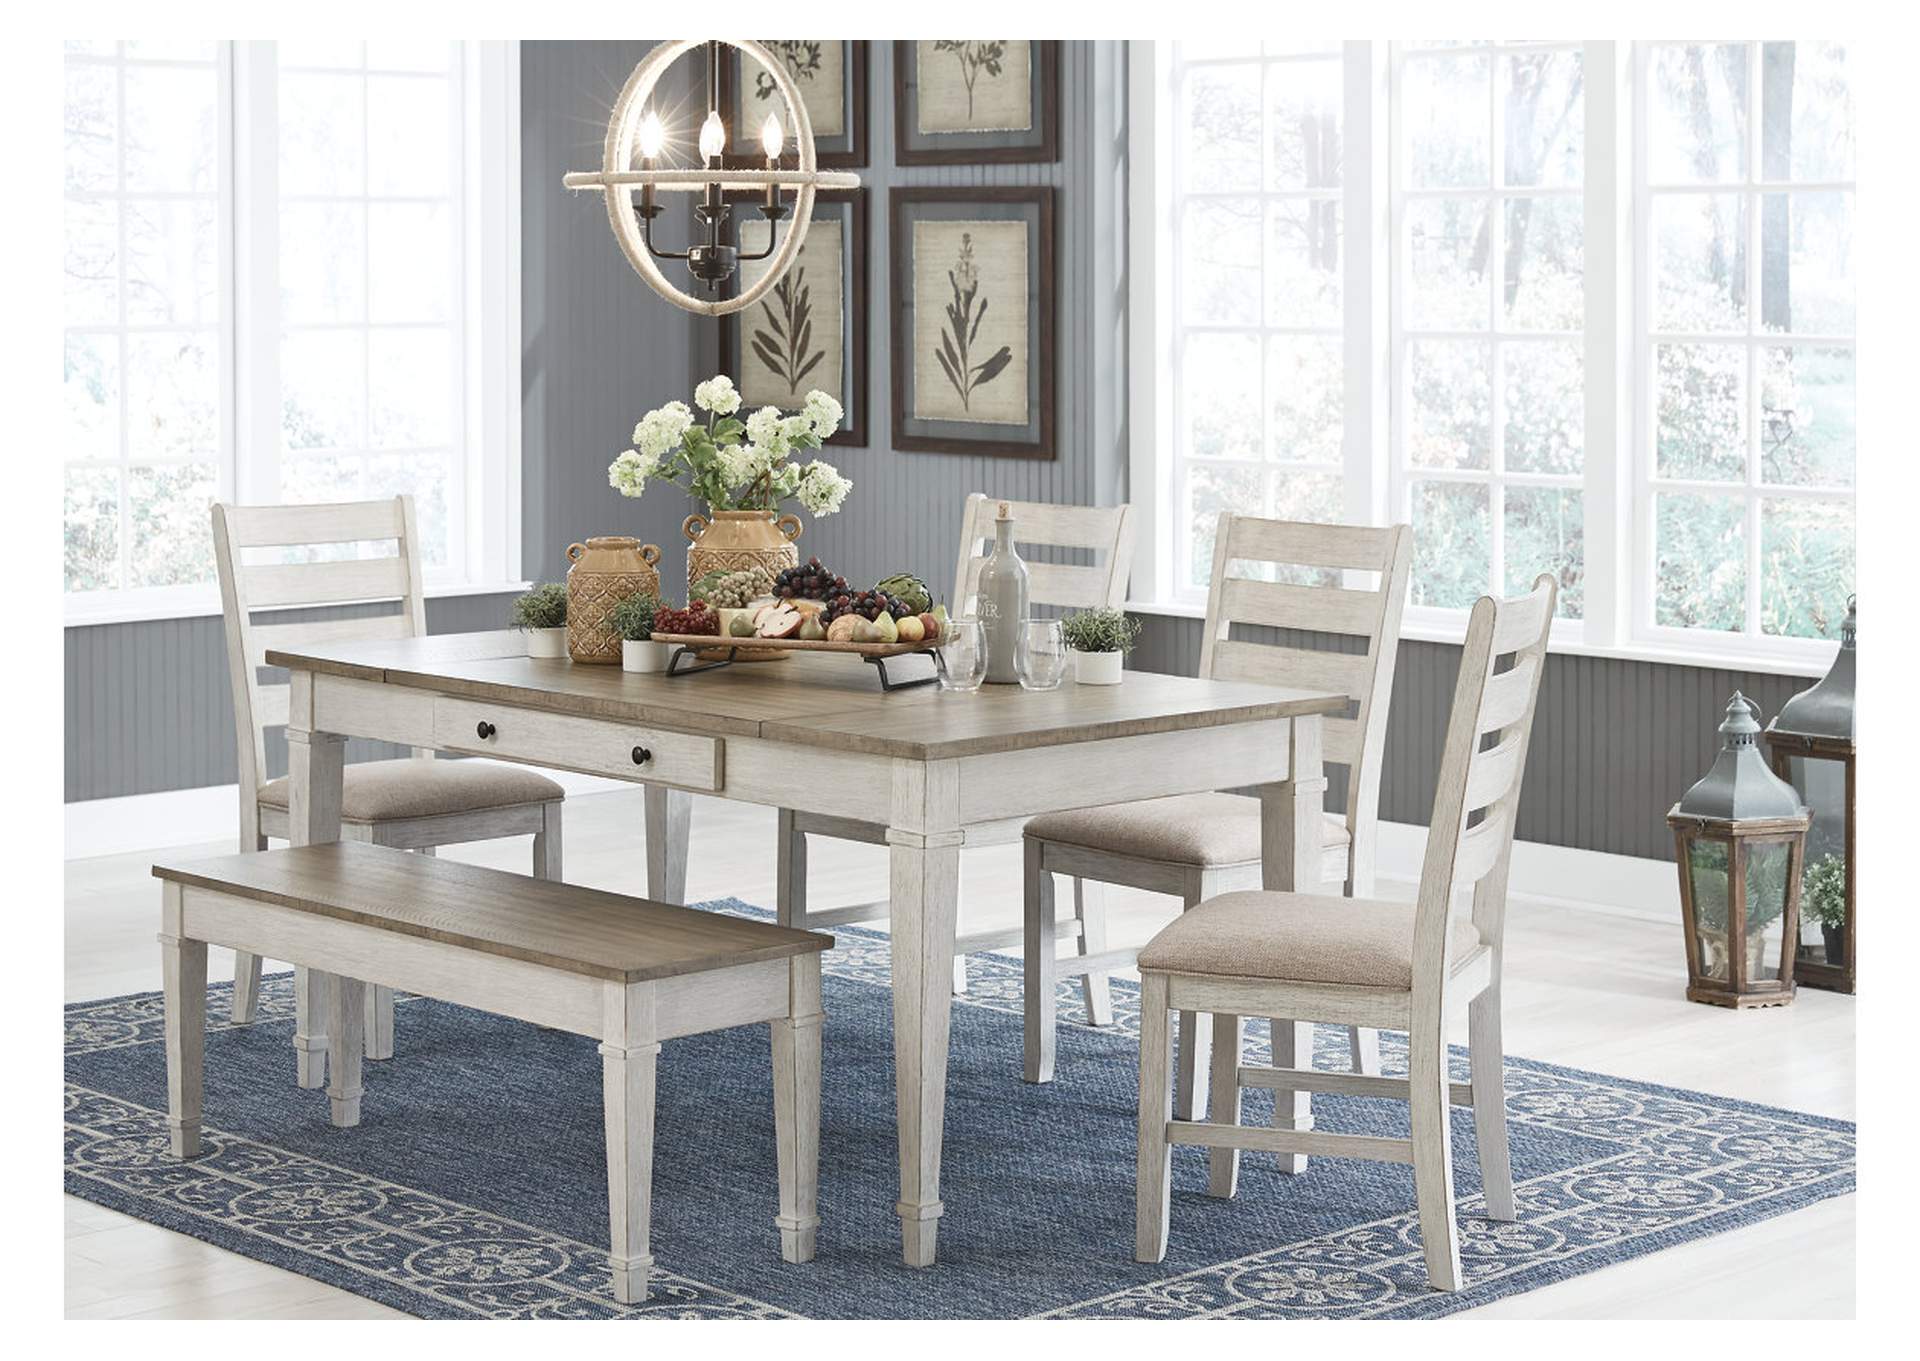 Skempton Dining Table, 4 Chairs, and Bench,Signature Design By Ashley